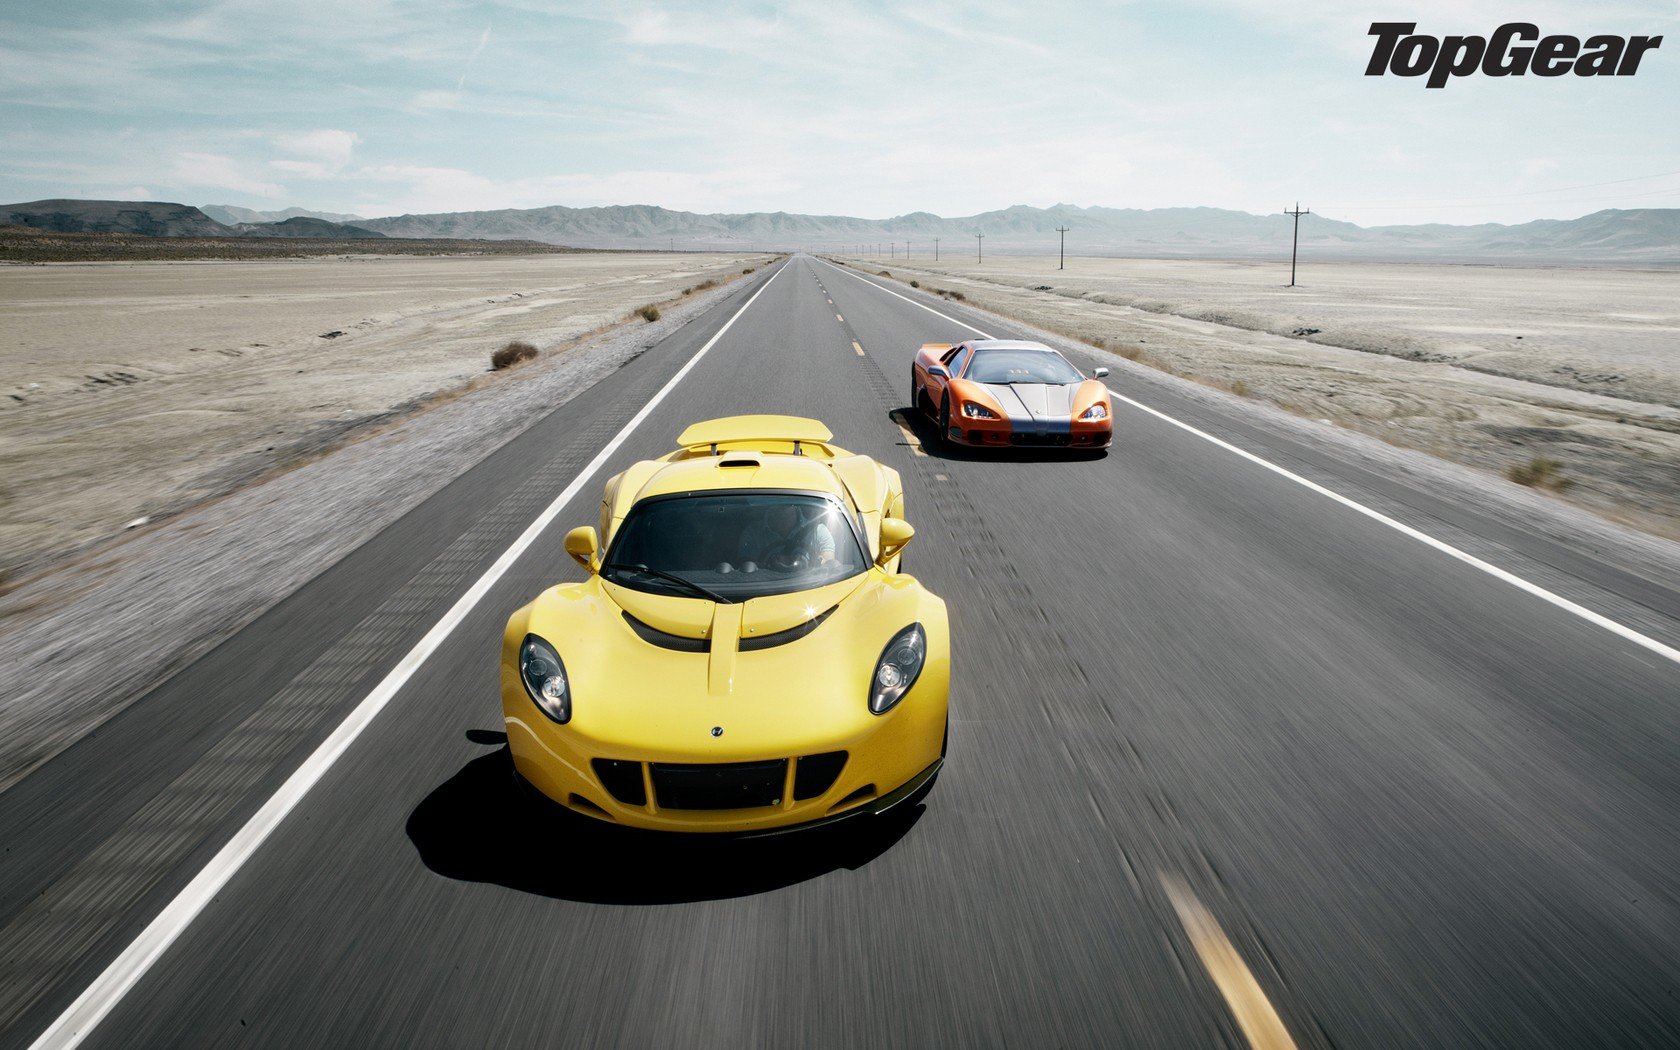 HD Top Gear desktop wallpaper featuring two high-performance cars racing on an open road.